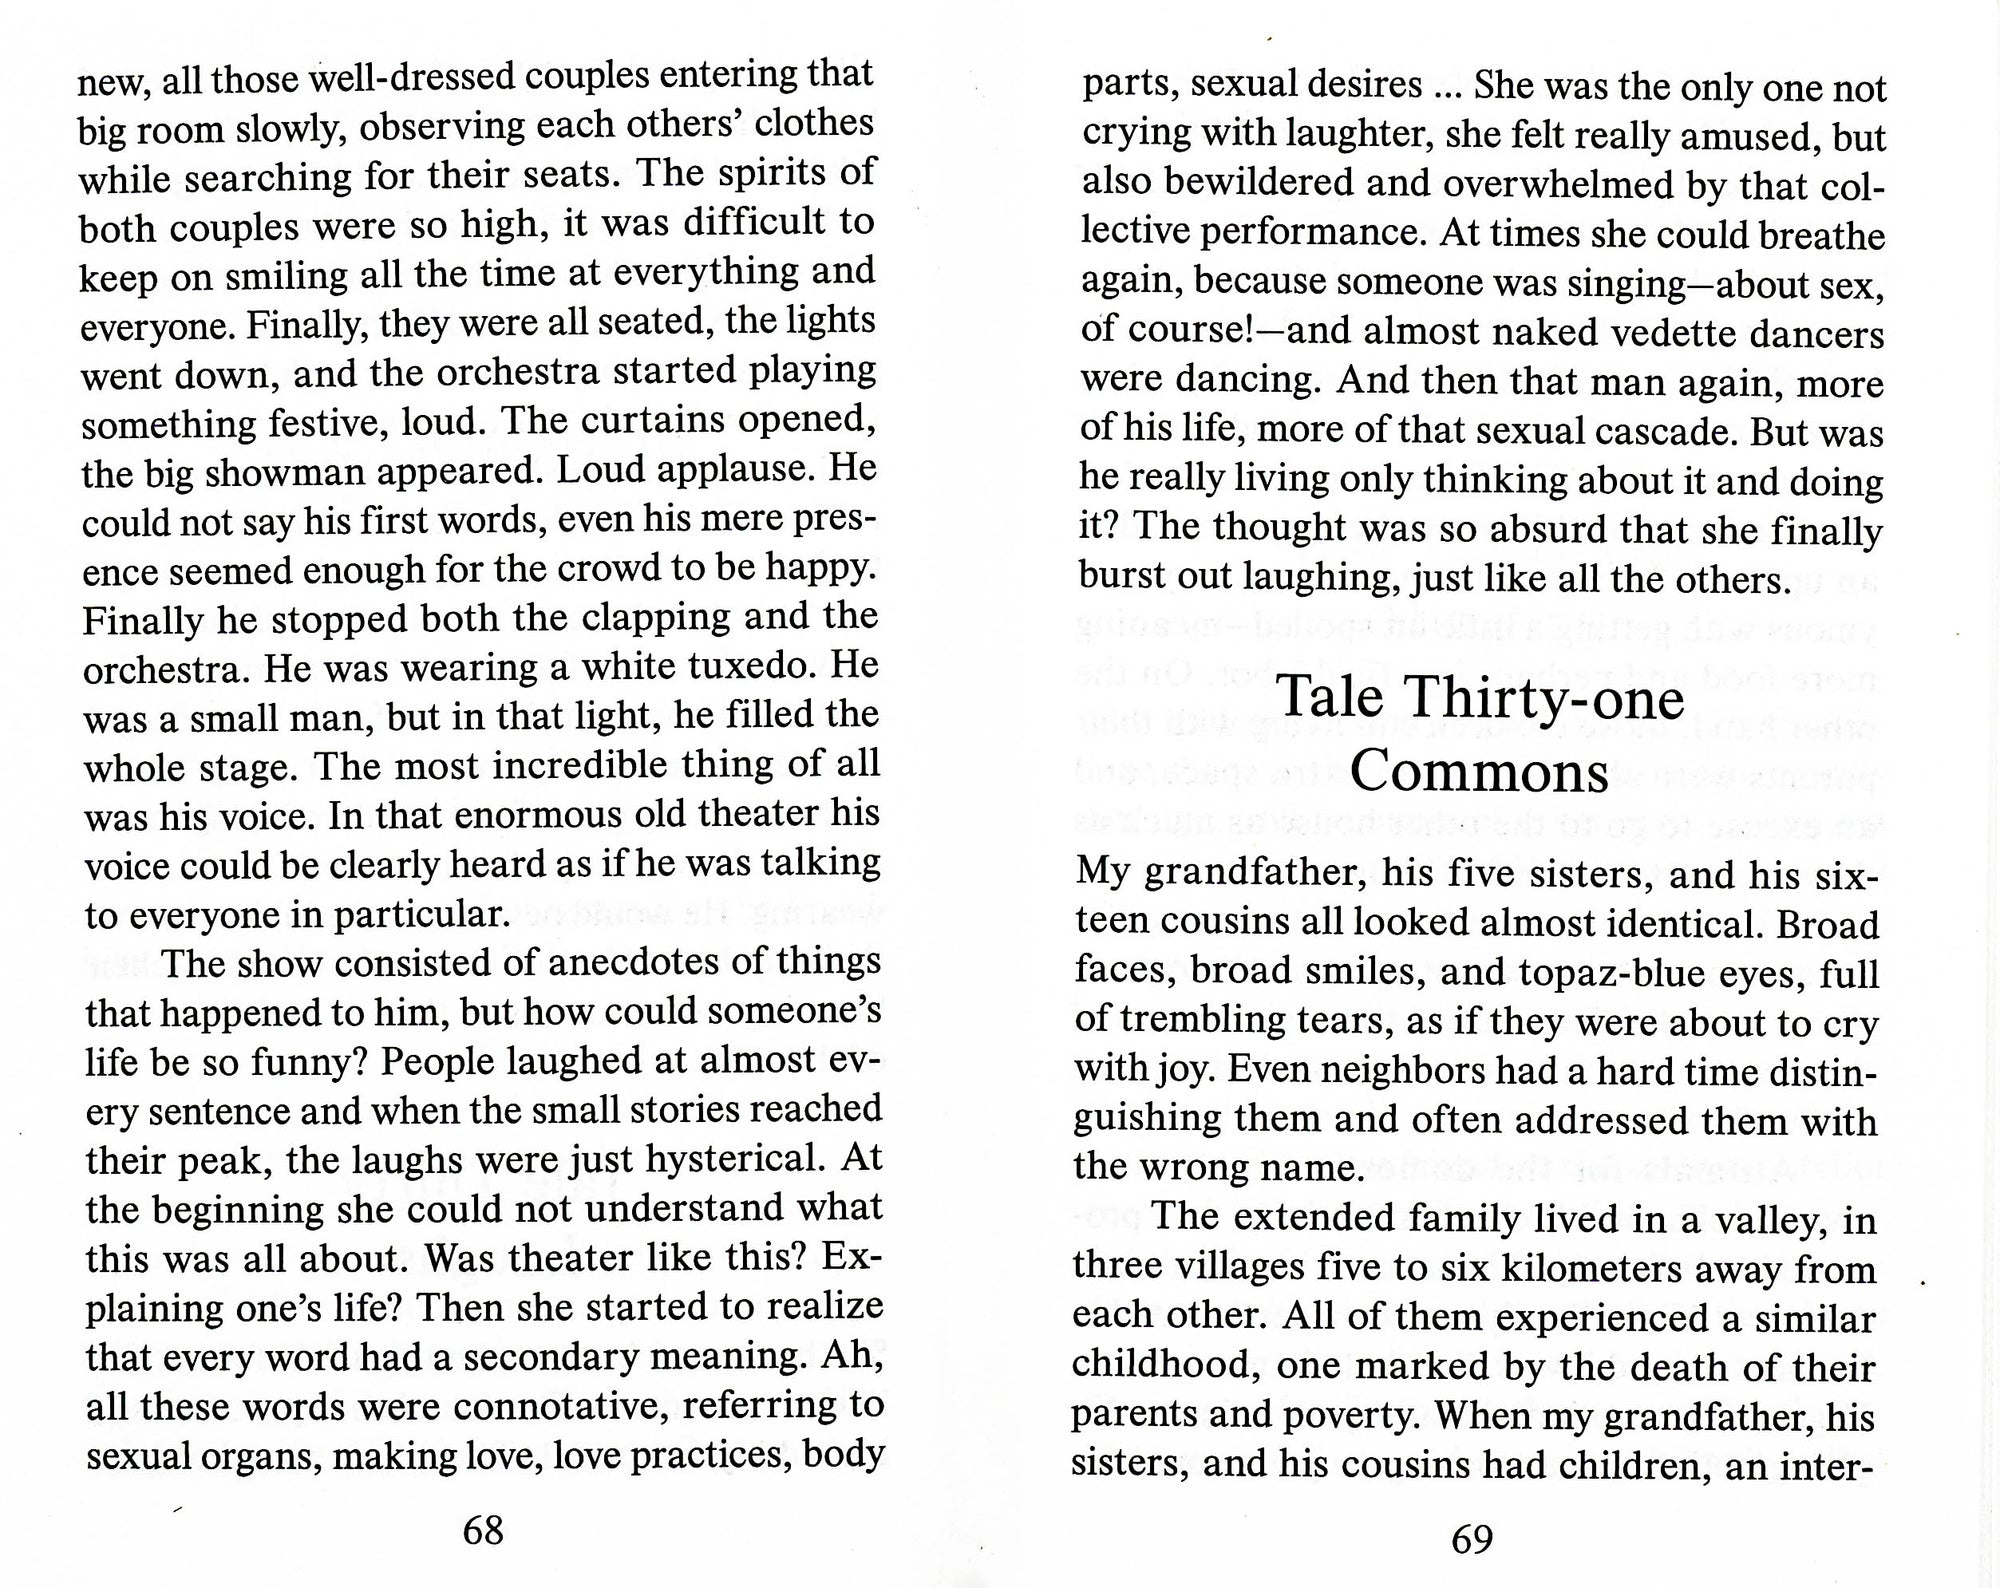 Book spread with white background and black serif text written on each side. The text on the right side is interrupted in the middle of the page by the title Tale Thirty-one Commons.